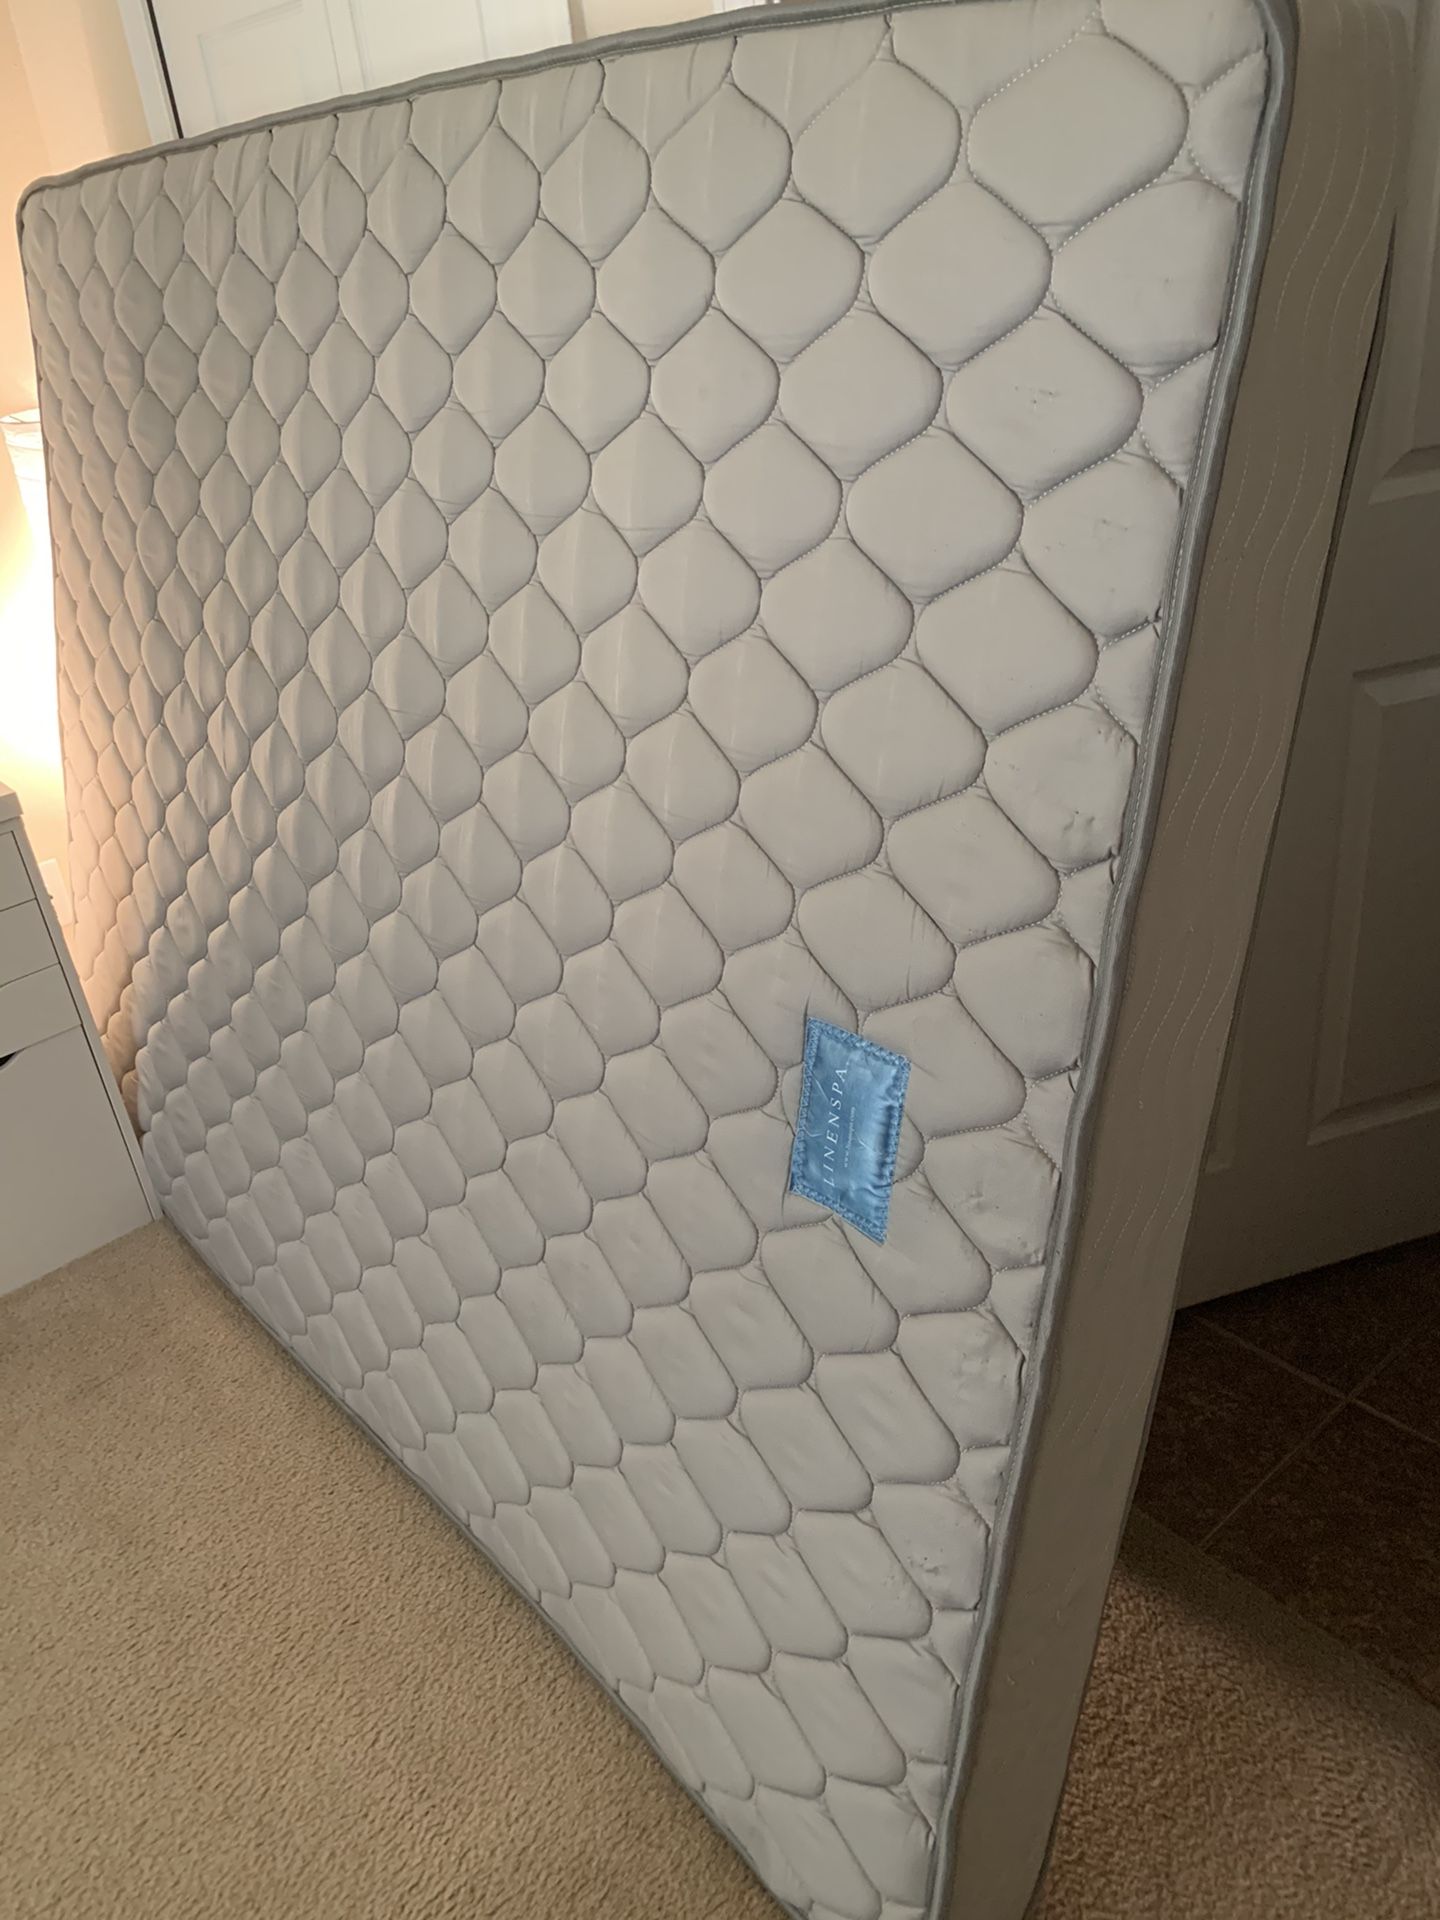 Queen Mattress (Free) if you see the add still available